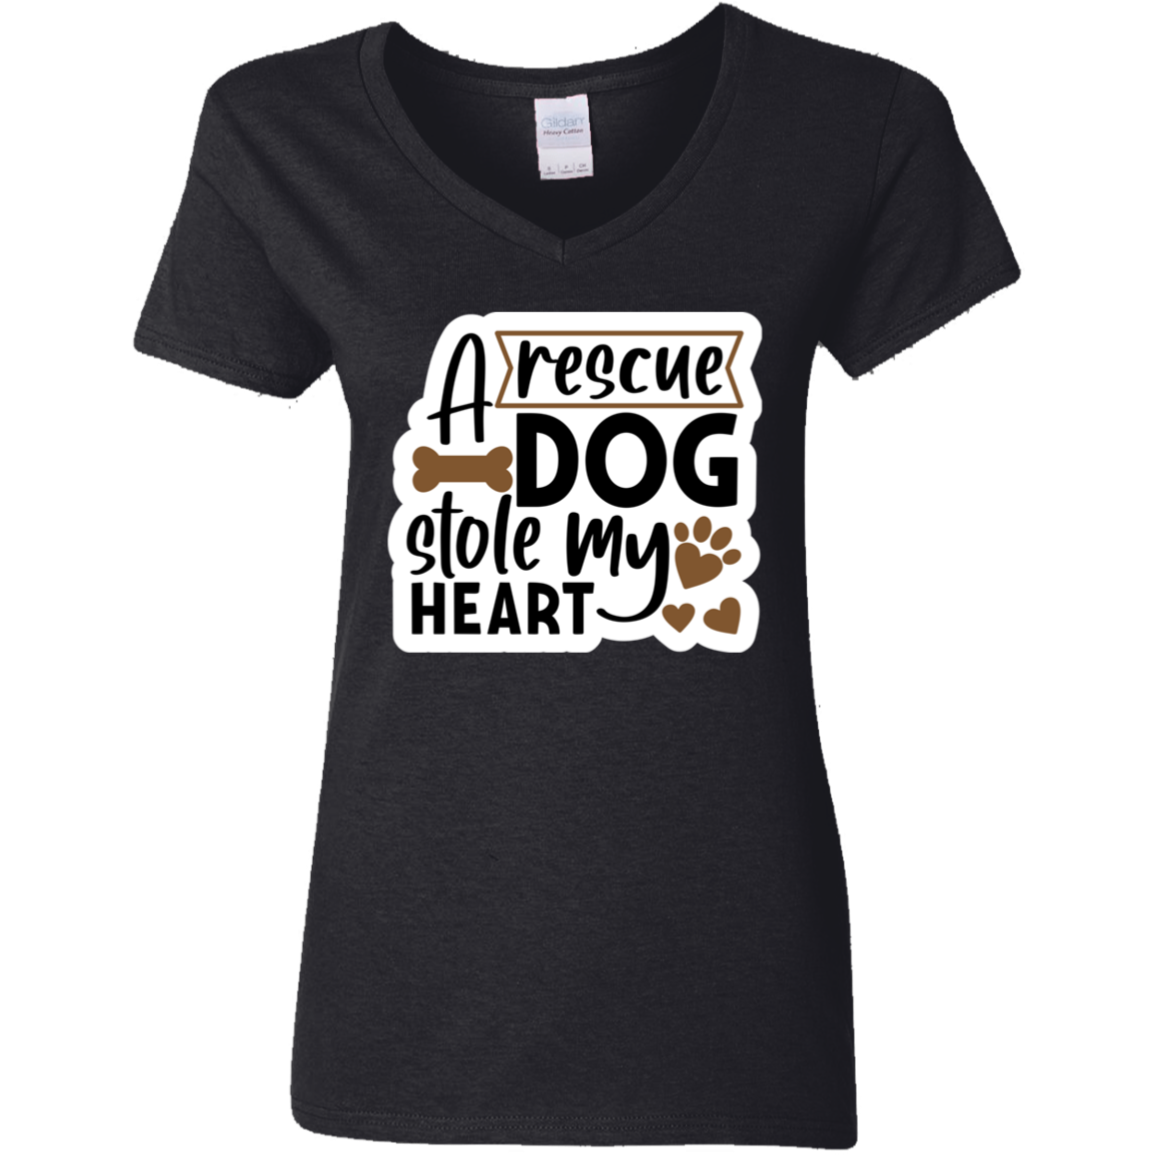 A Rescue Dog Stole My Heart Ladies' V-Neck T-Shirt